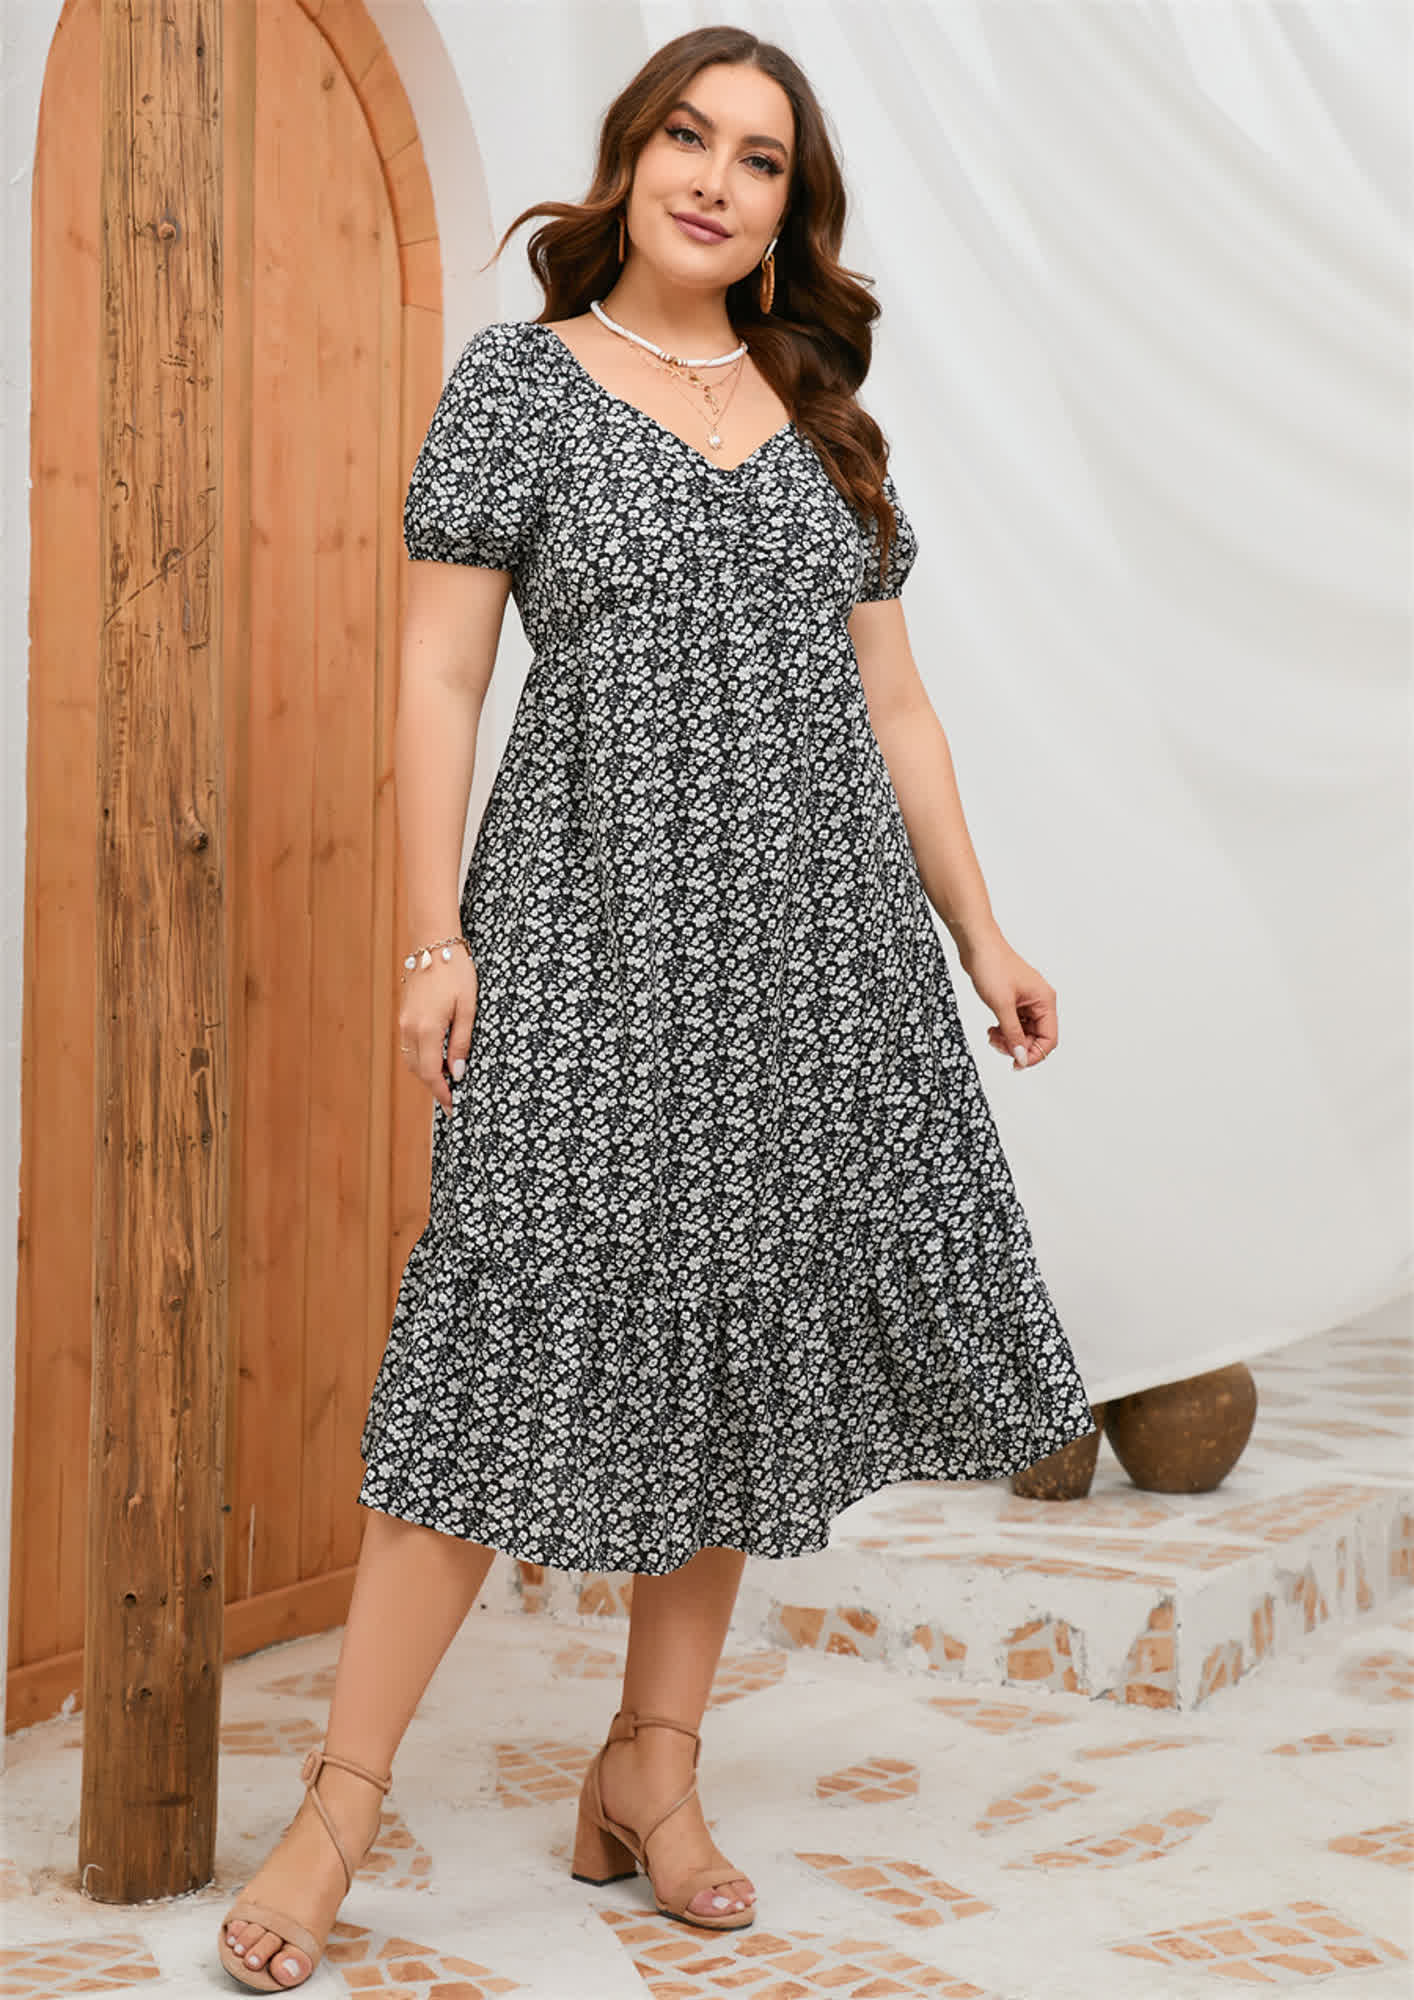 Plus Size Outfits - Buy Plus Size Clothing for Women Online in India